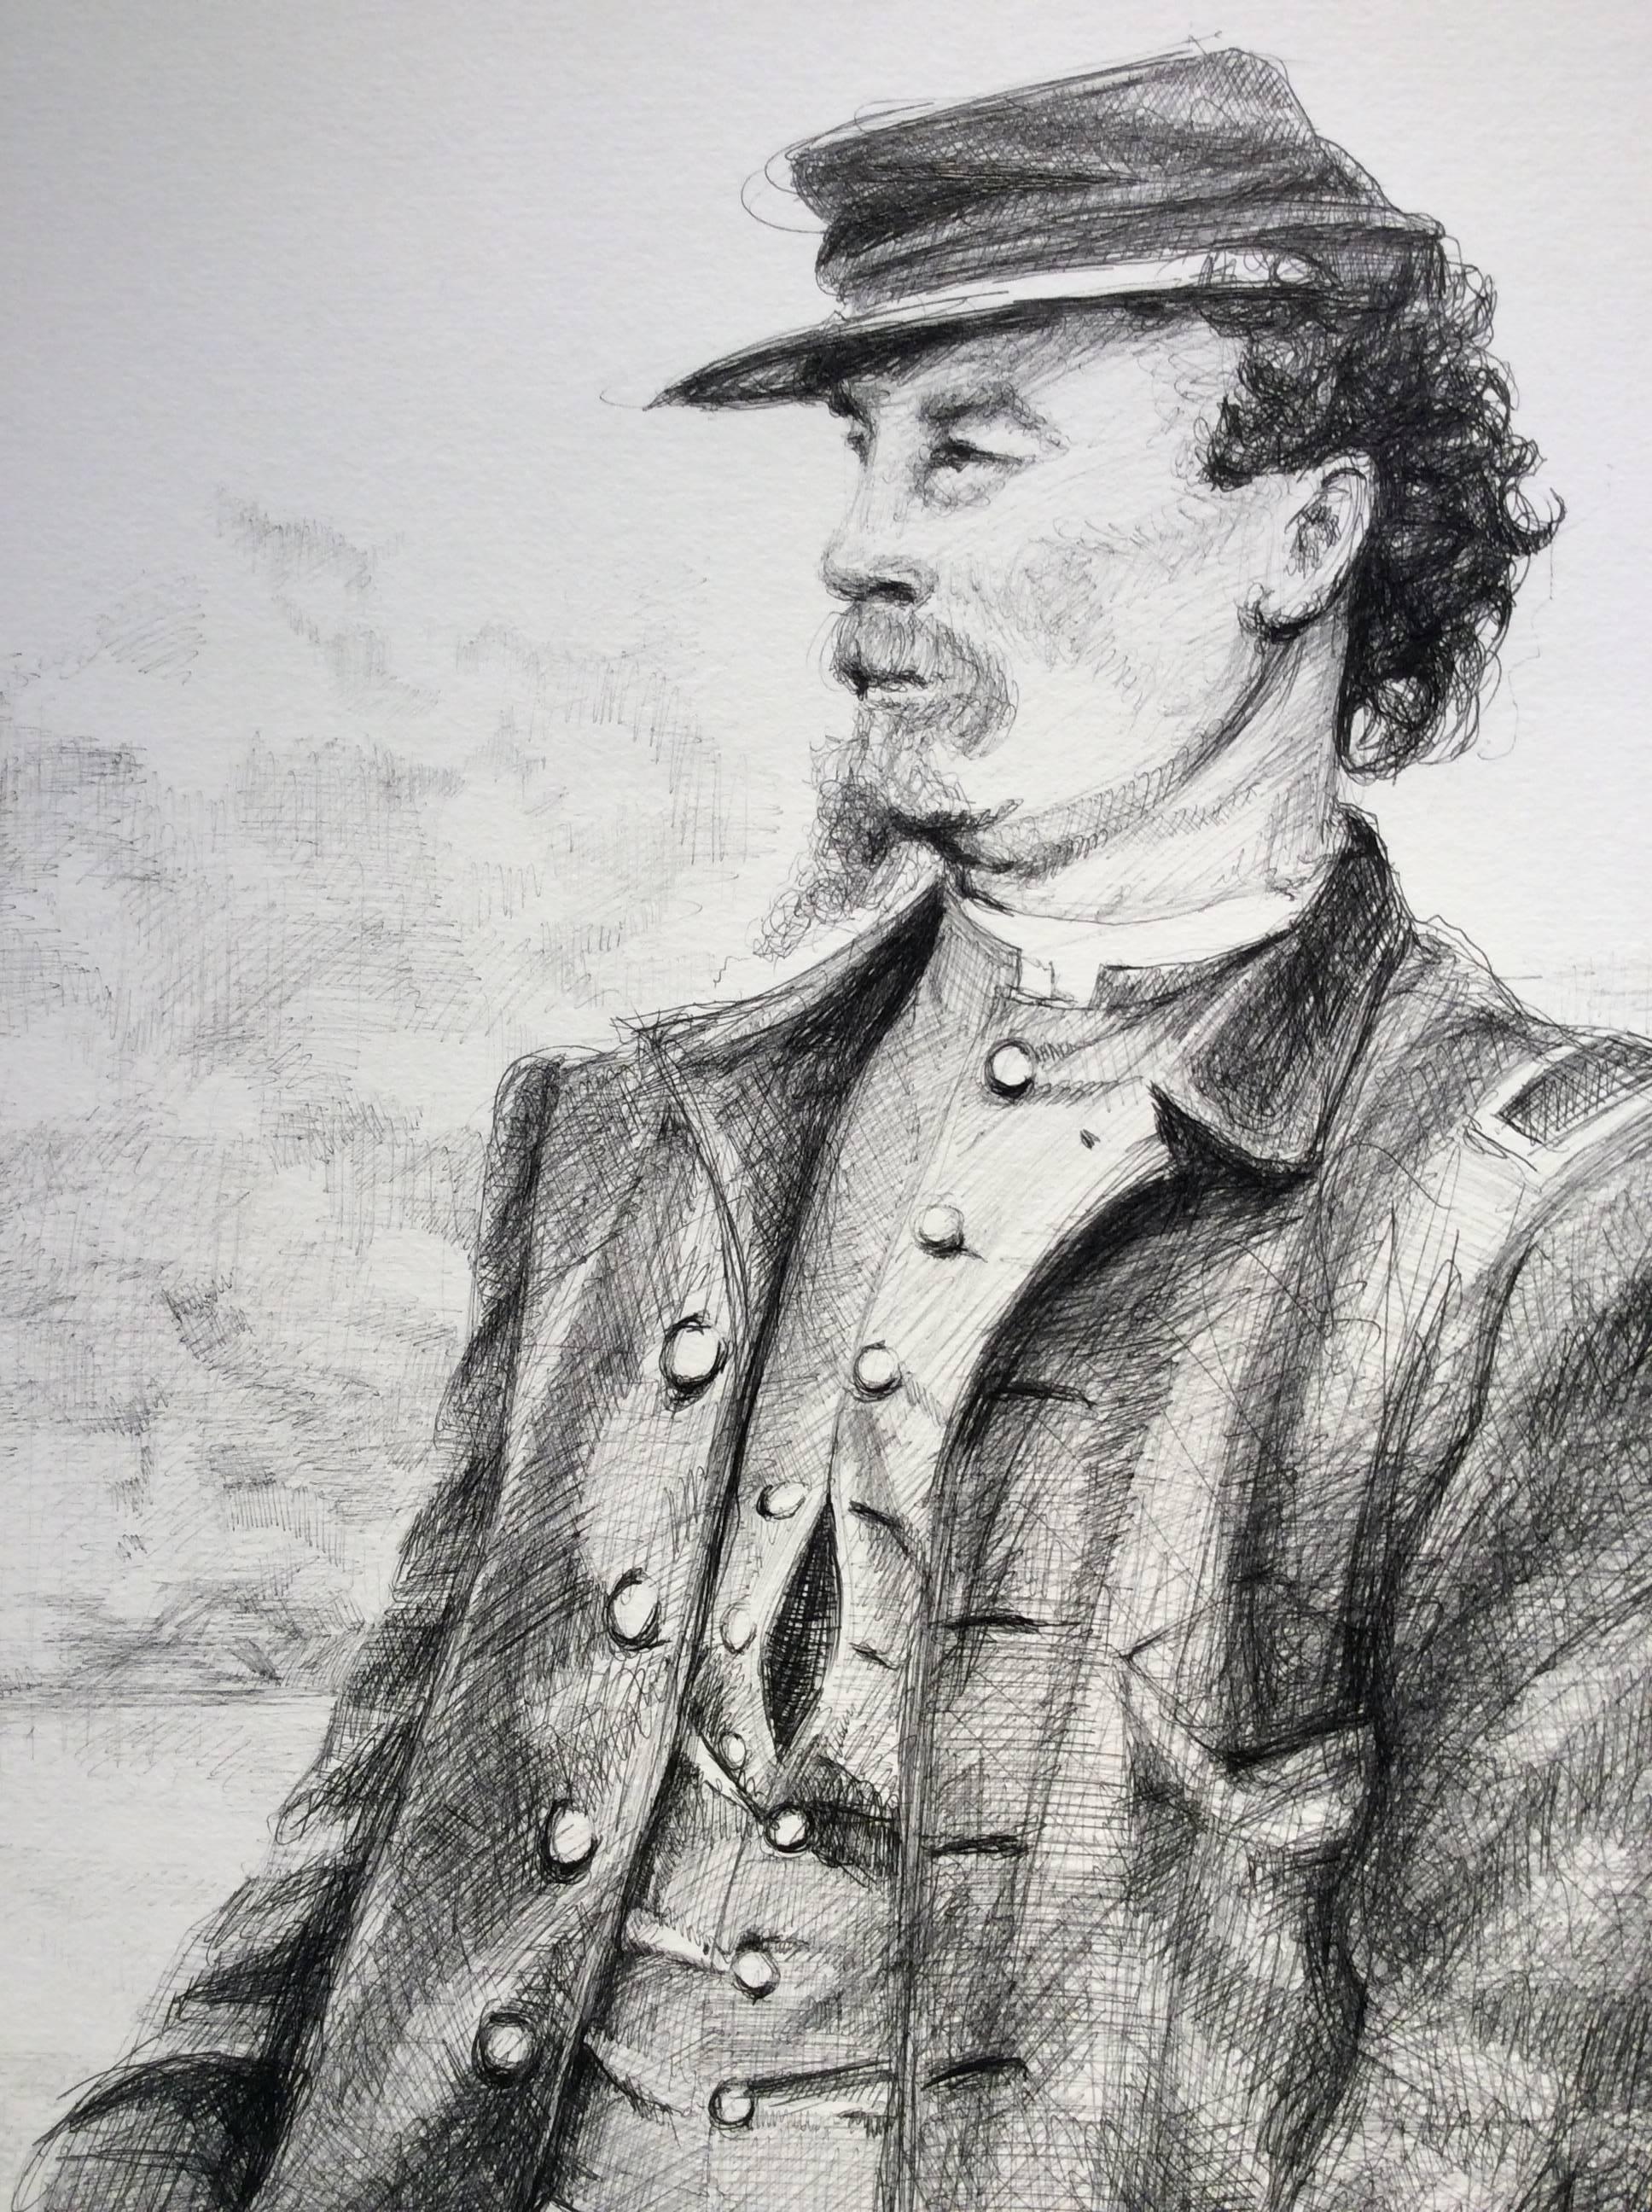 The Letter (Large Black & White Ballpoint Pen Drawing of Civil War Soldiers) - Gray Portrait by Linda Newman Boughton